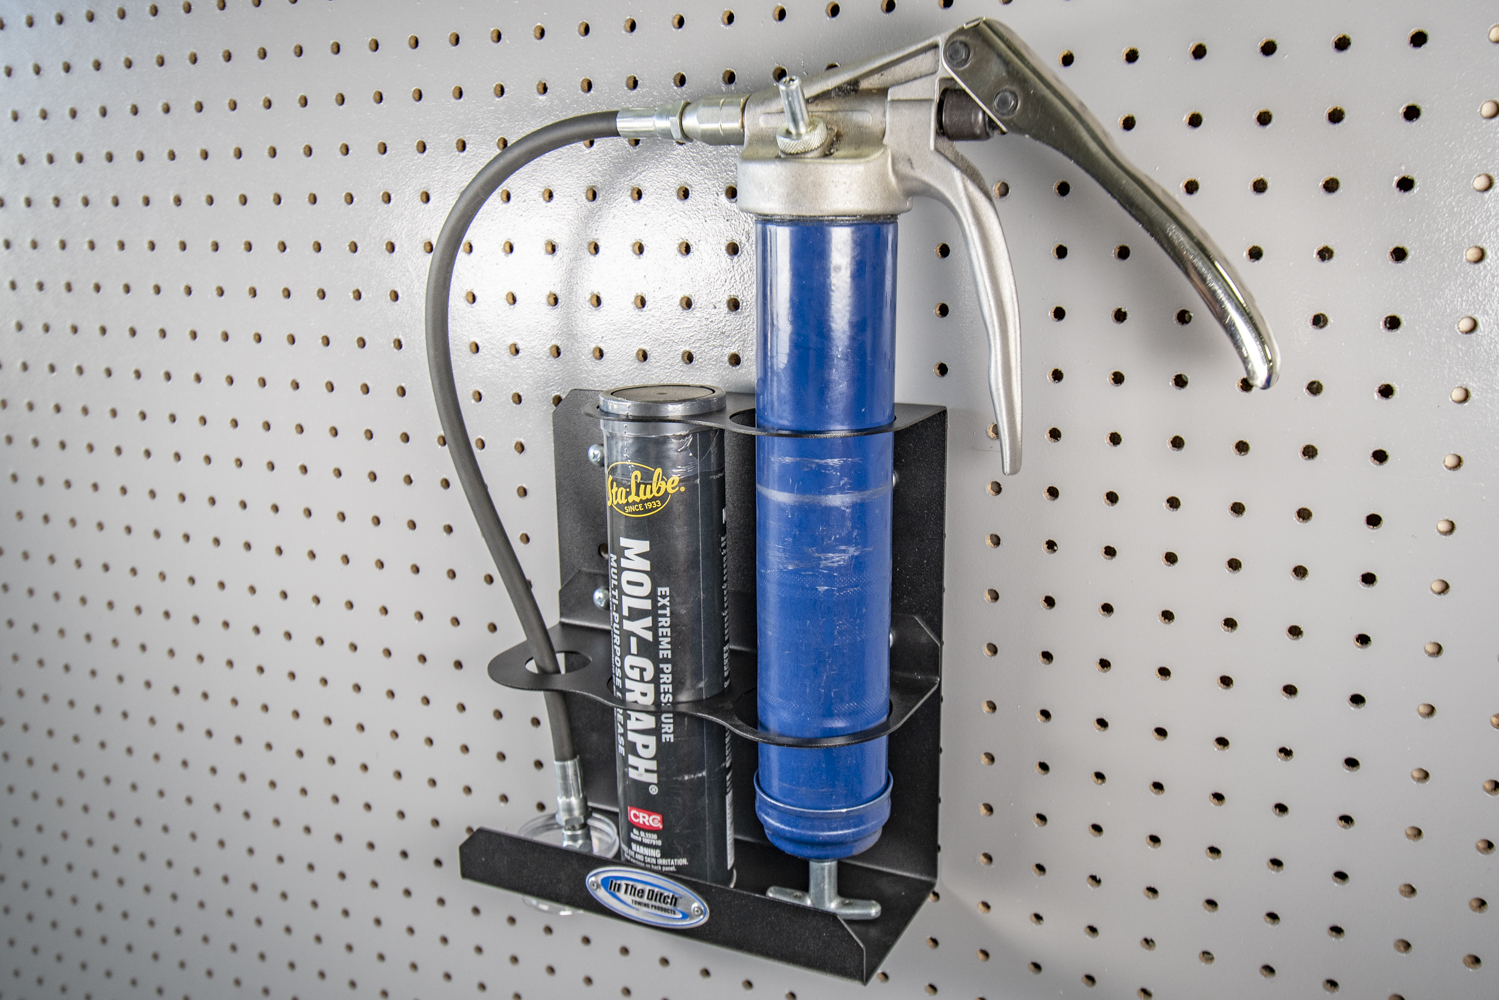 https://intheditch.com/wp-content/uploads/690-In-The-Ditch-Garage-Grease-Gun-Holder-ITD1889.jpg